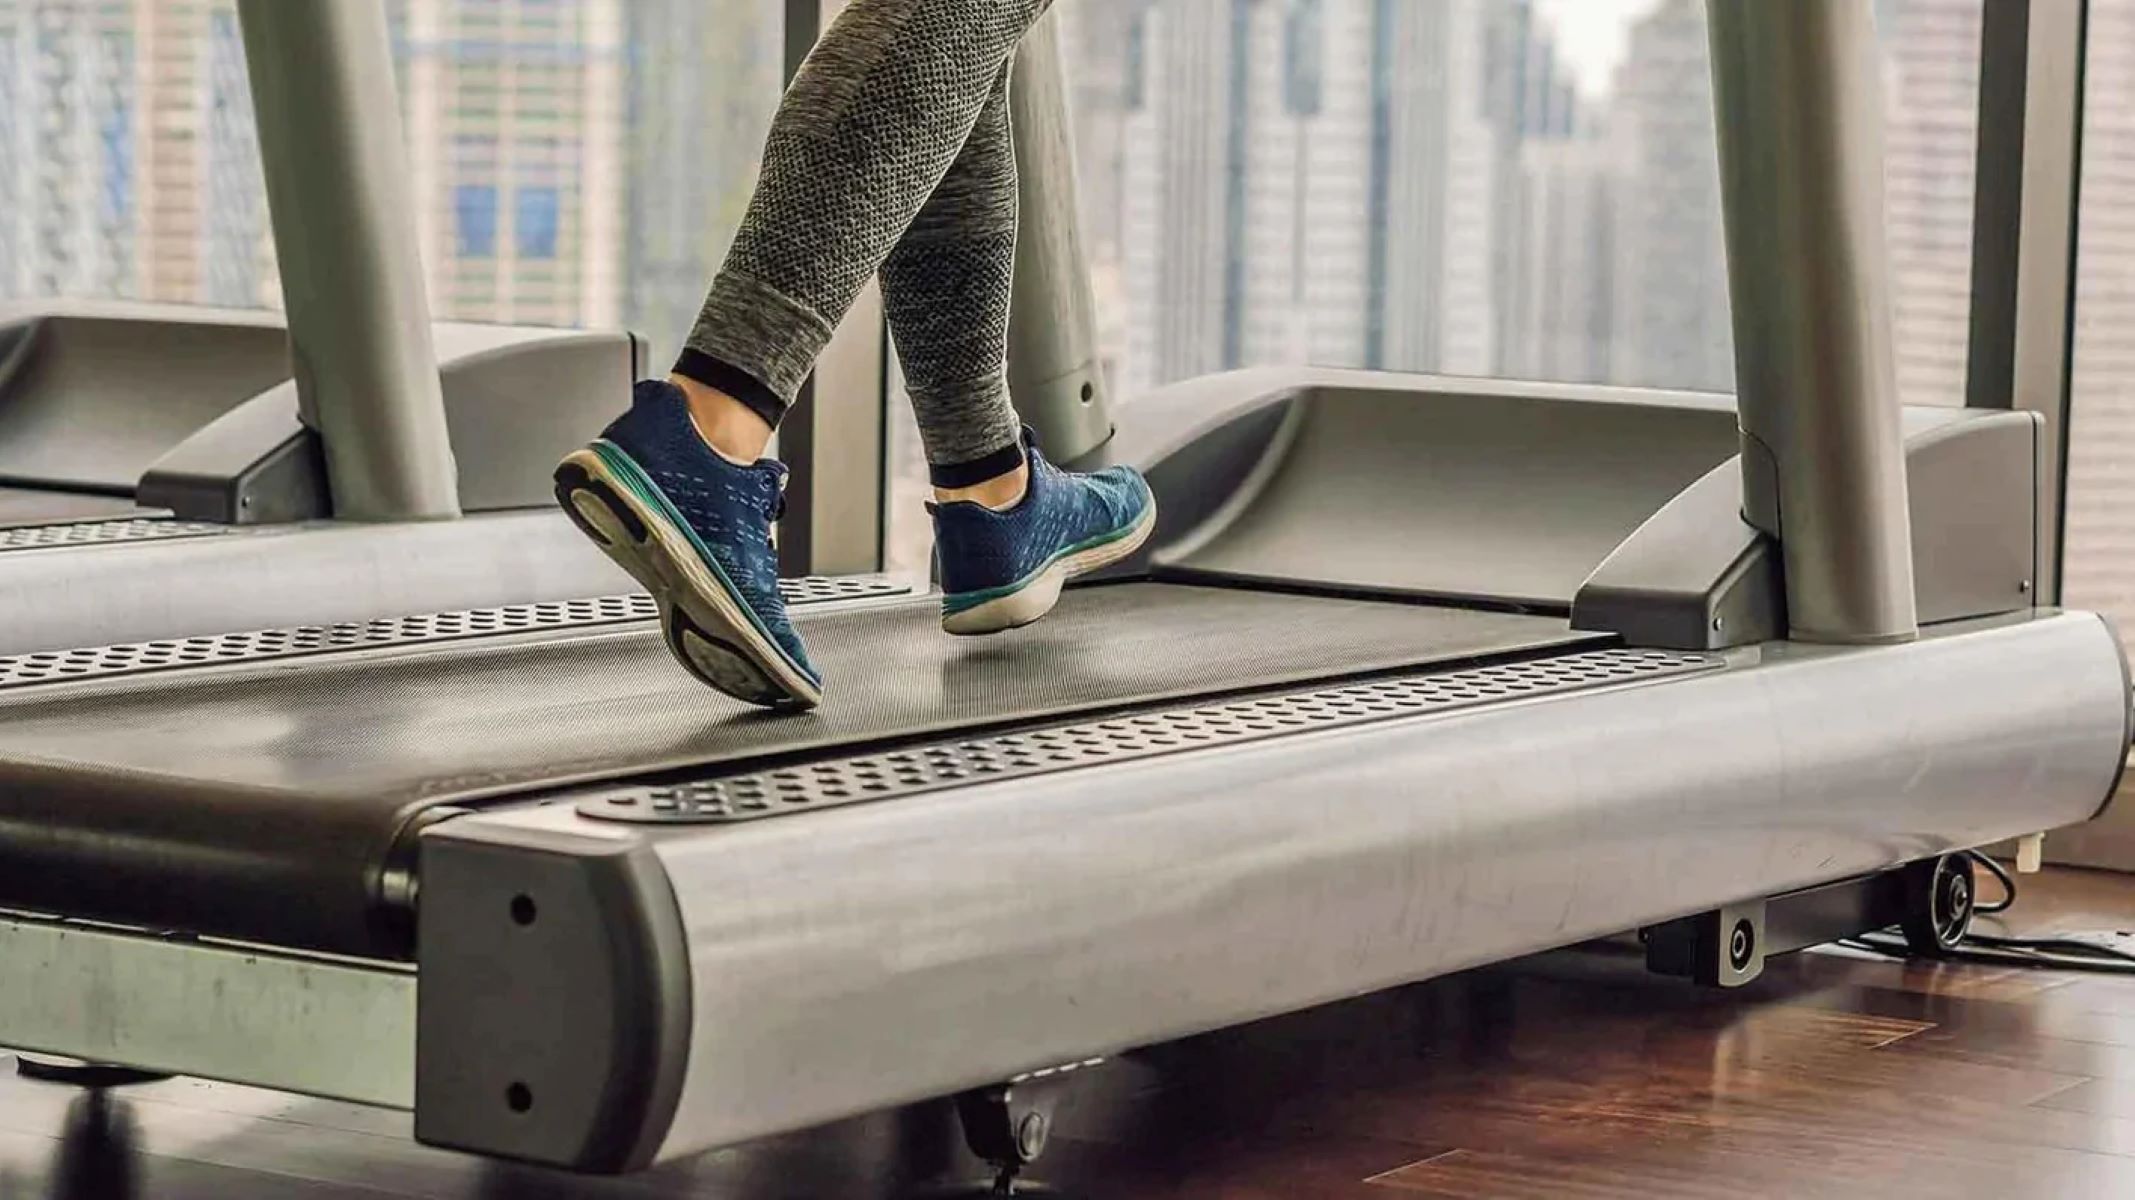 How To Make Treadmill Quieter